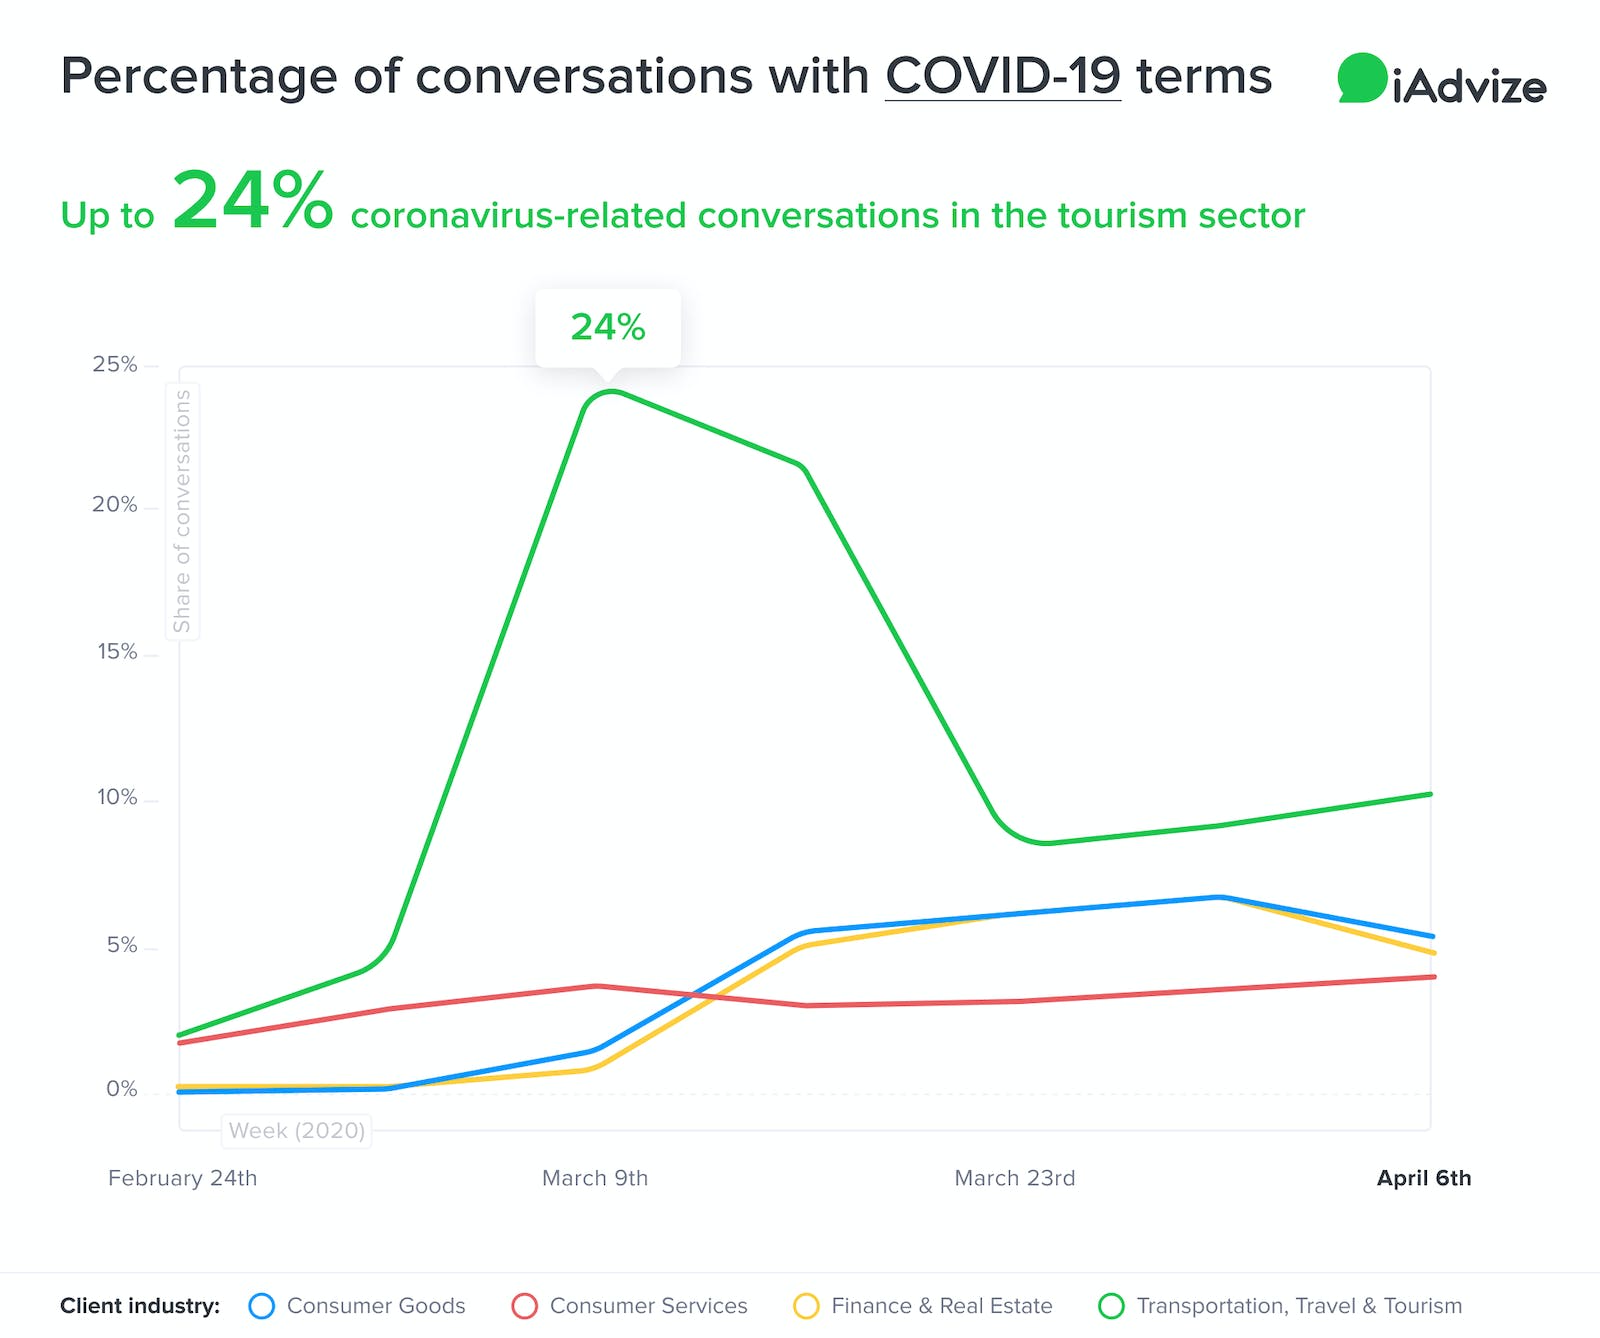 Percentage of conversation with COVID-19 terms